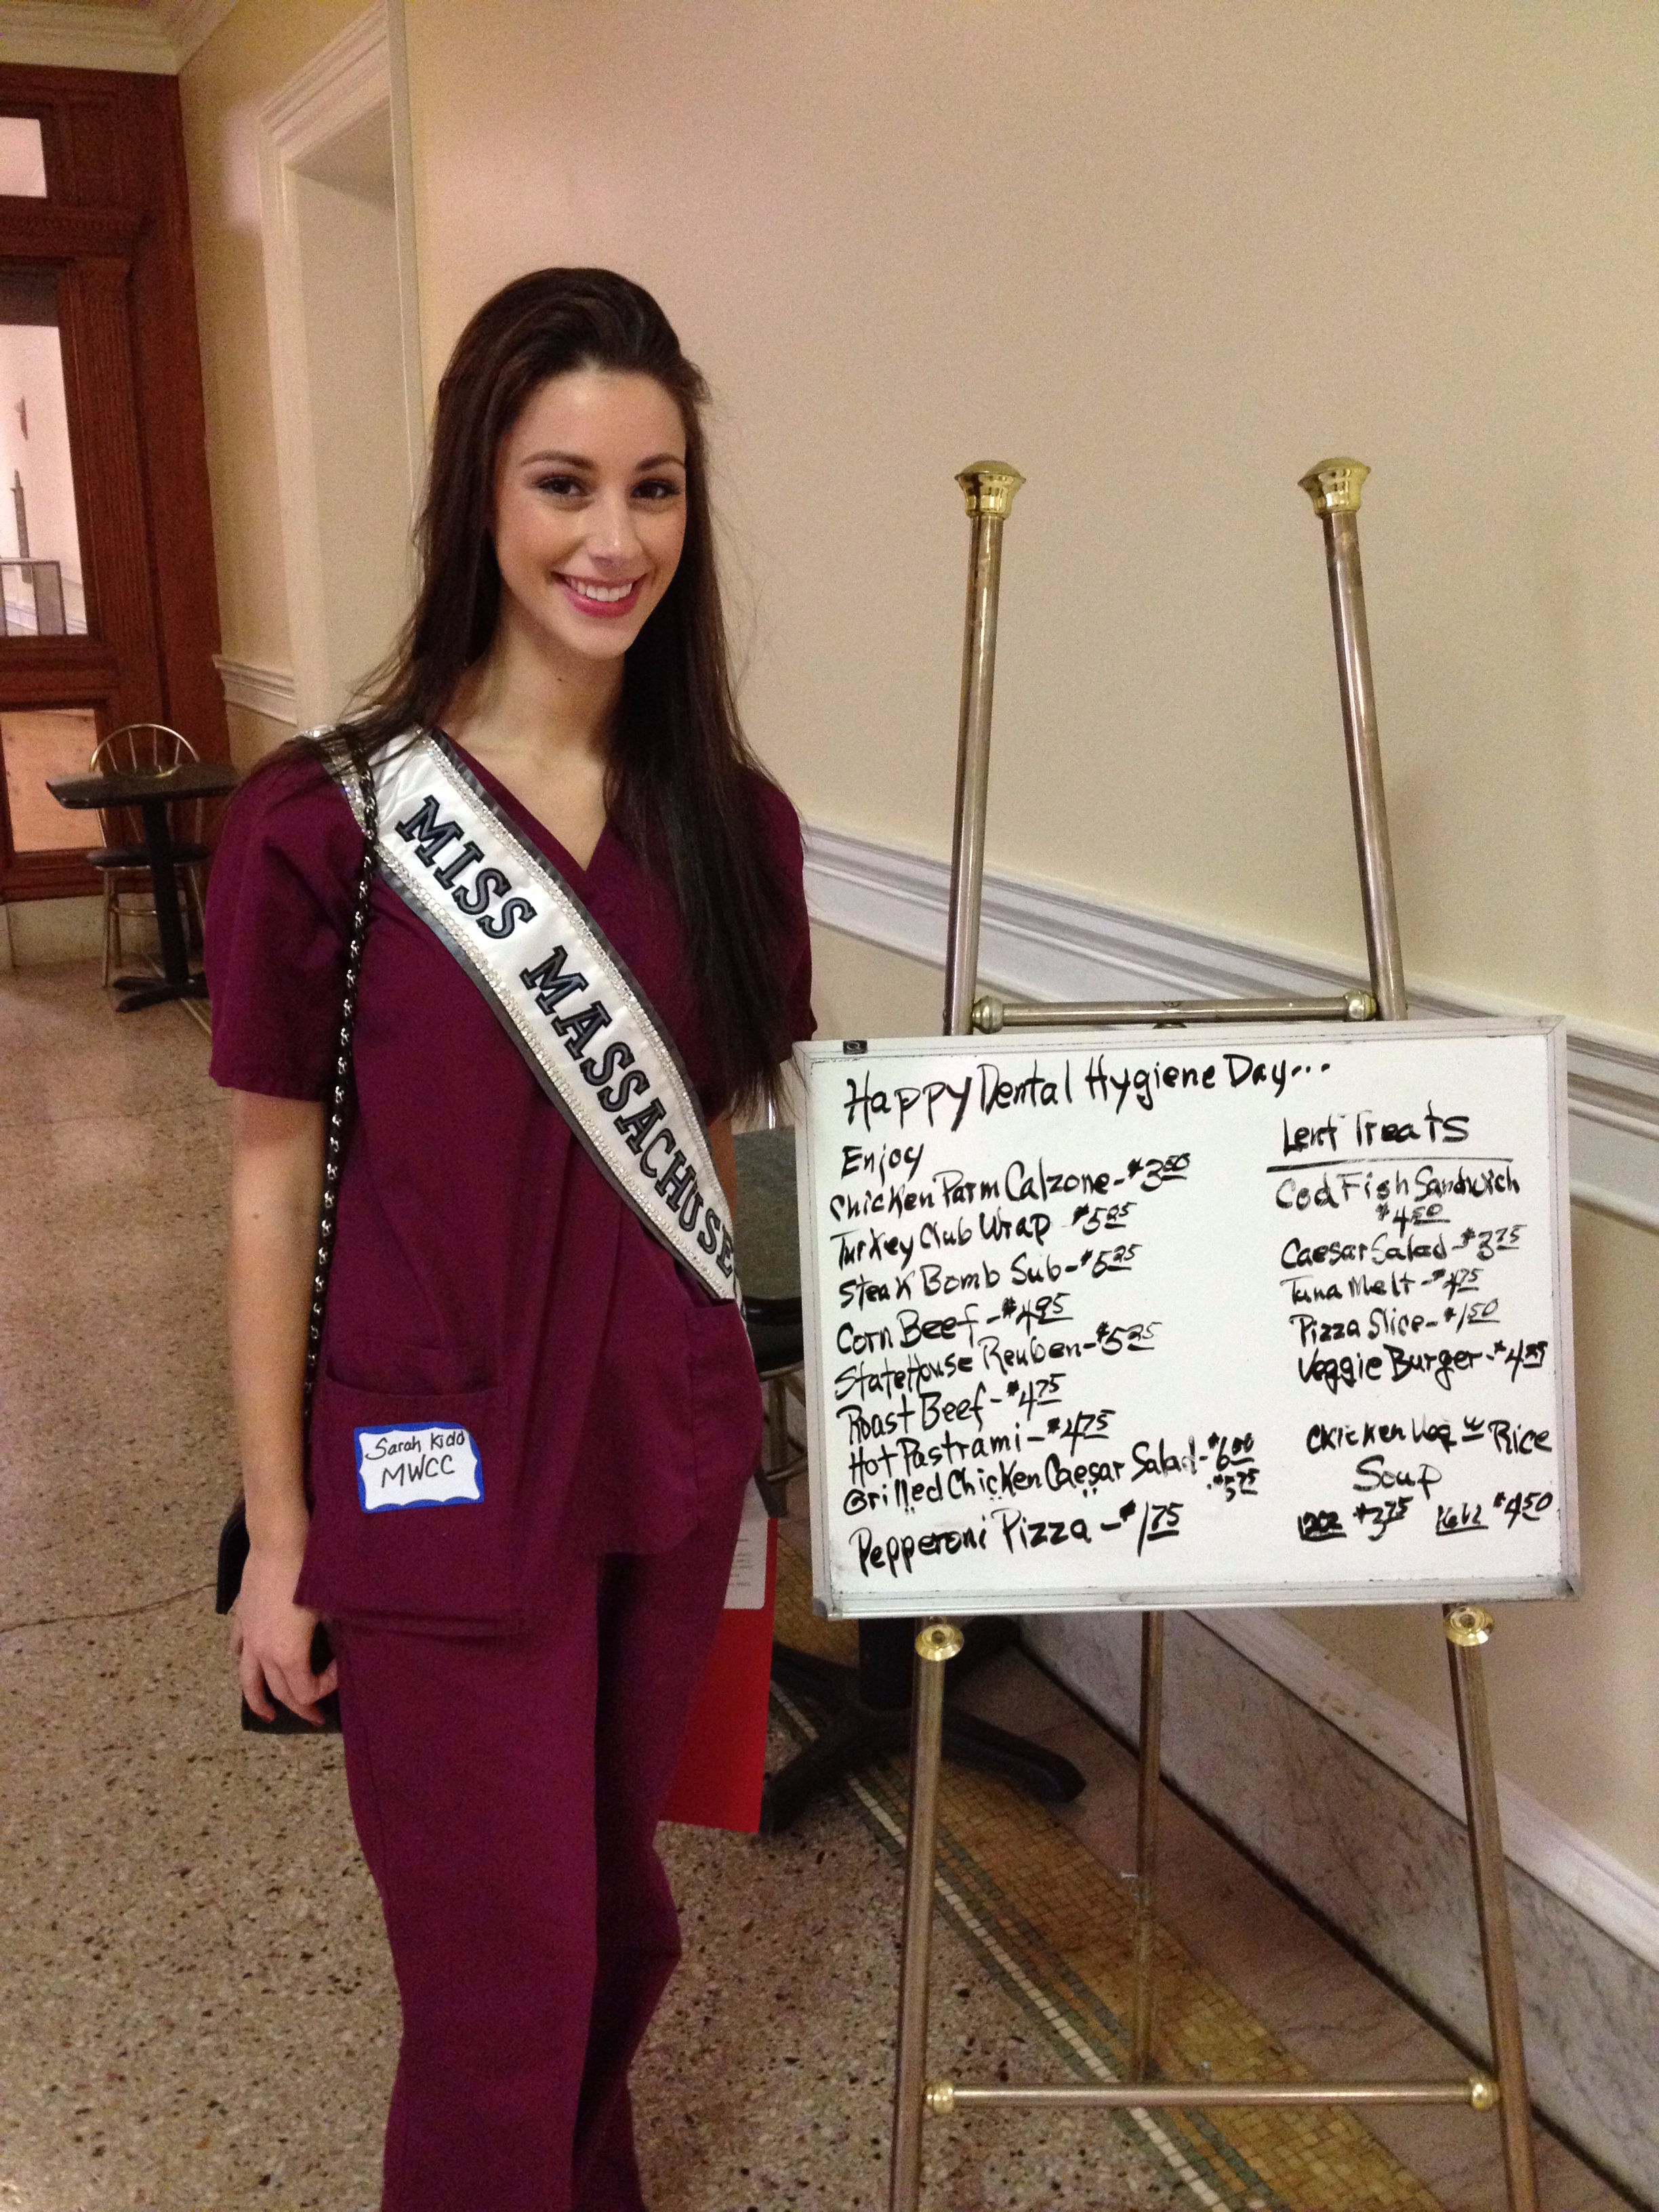 "Miss Massachusetts" on Dental Hygiene Day at the State House 